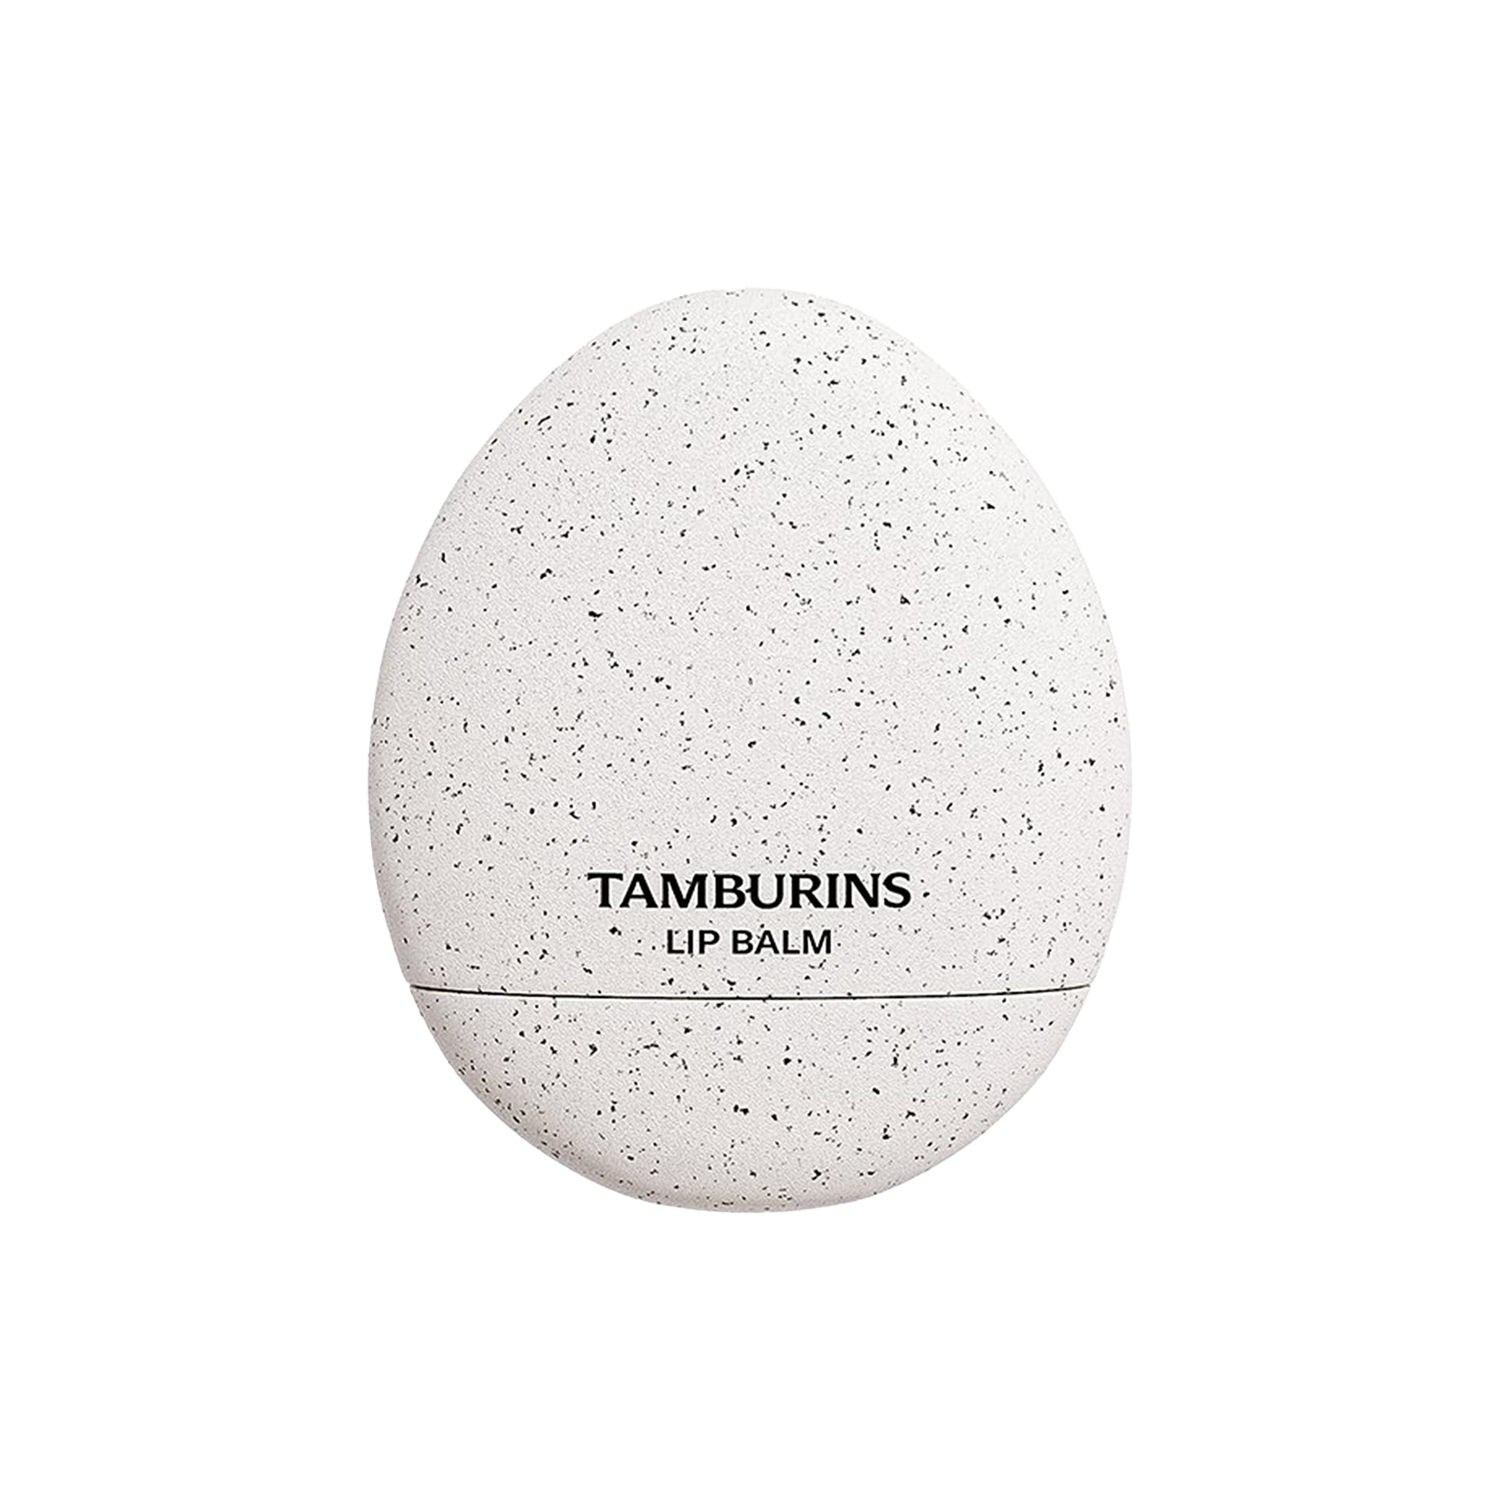 White egg-shaped lip balm container with 'TAMBURINS Egg Lip Balm' label from Palermo.